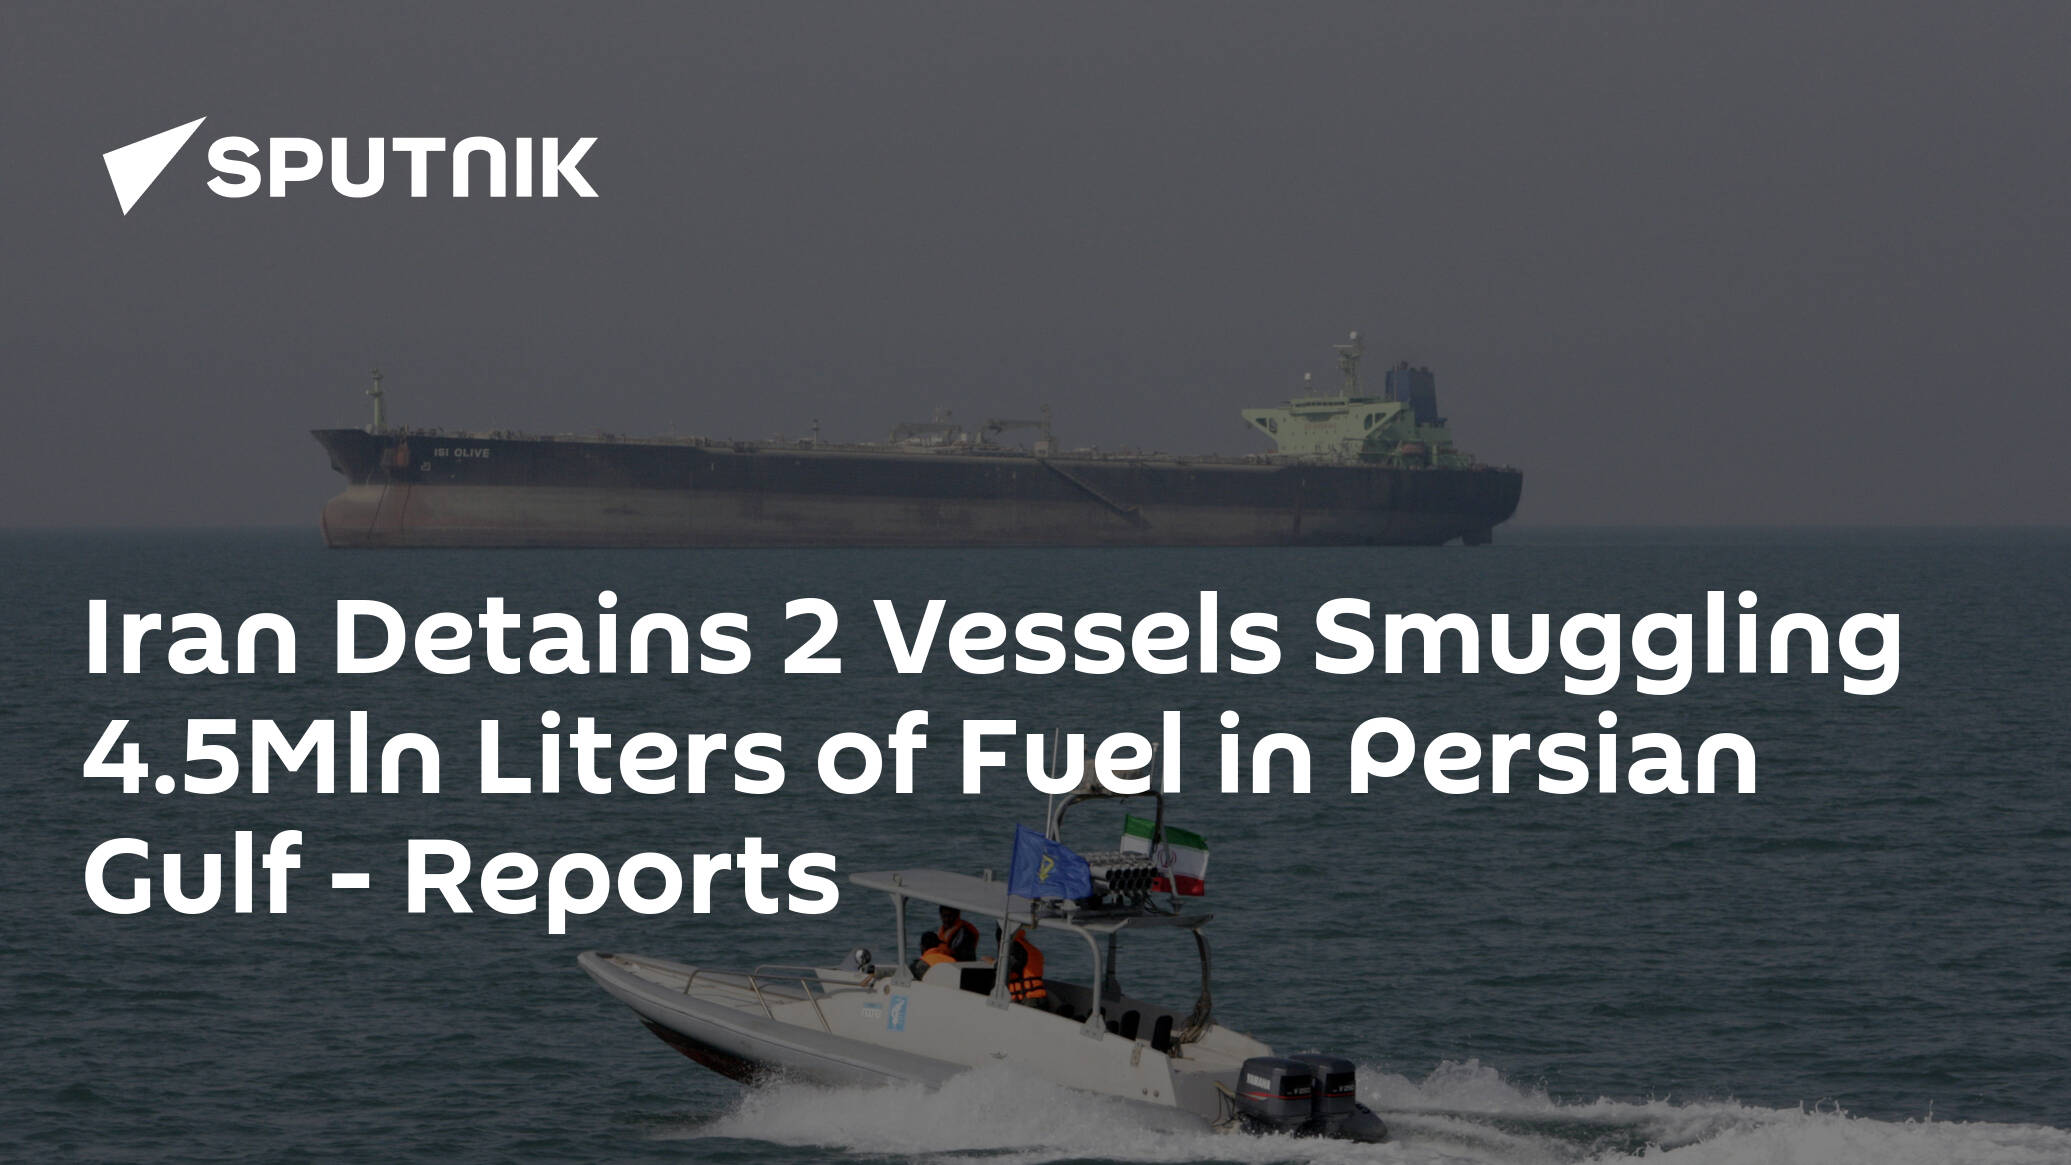 Iran Detains 2 Vessels Smuggling 4.5Mln Liters of Fuel in Persian Gulf – Reports